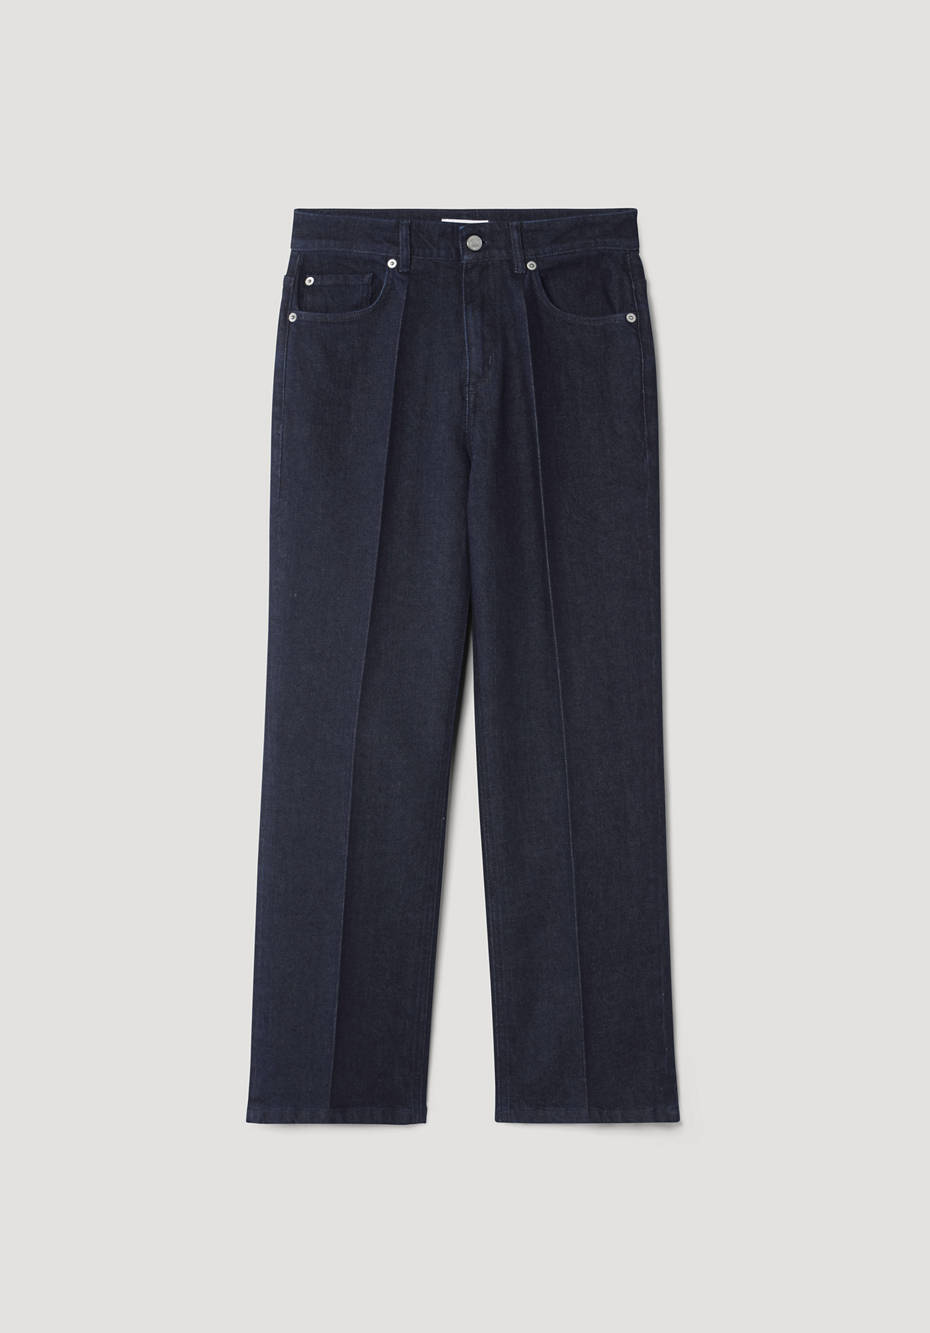 Relaxed fit jeans made of organic wool denim